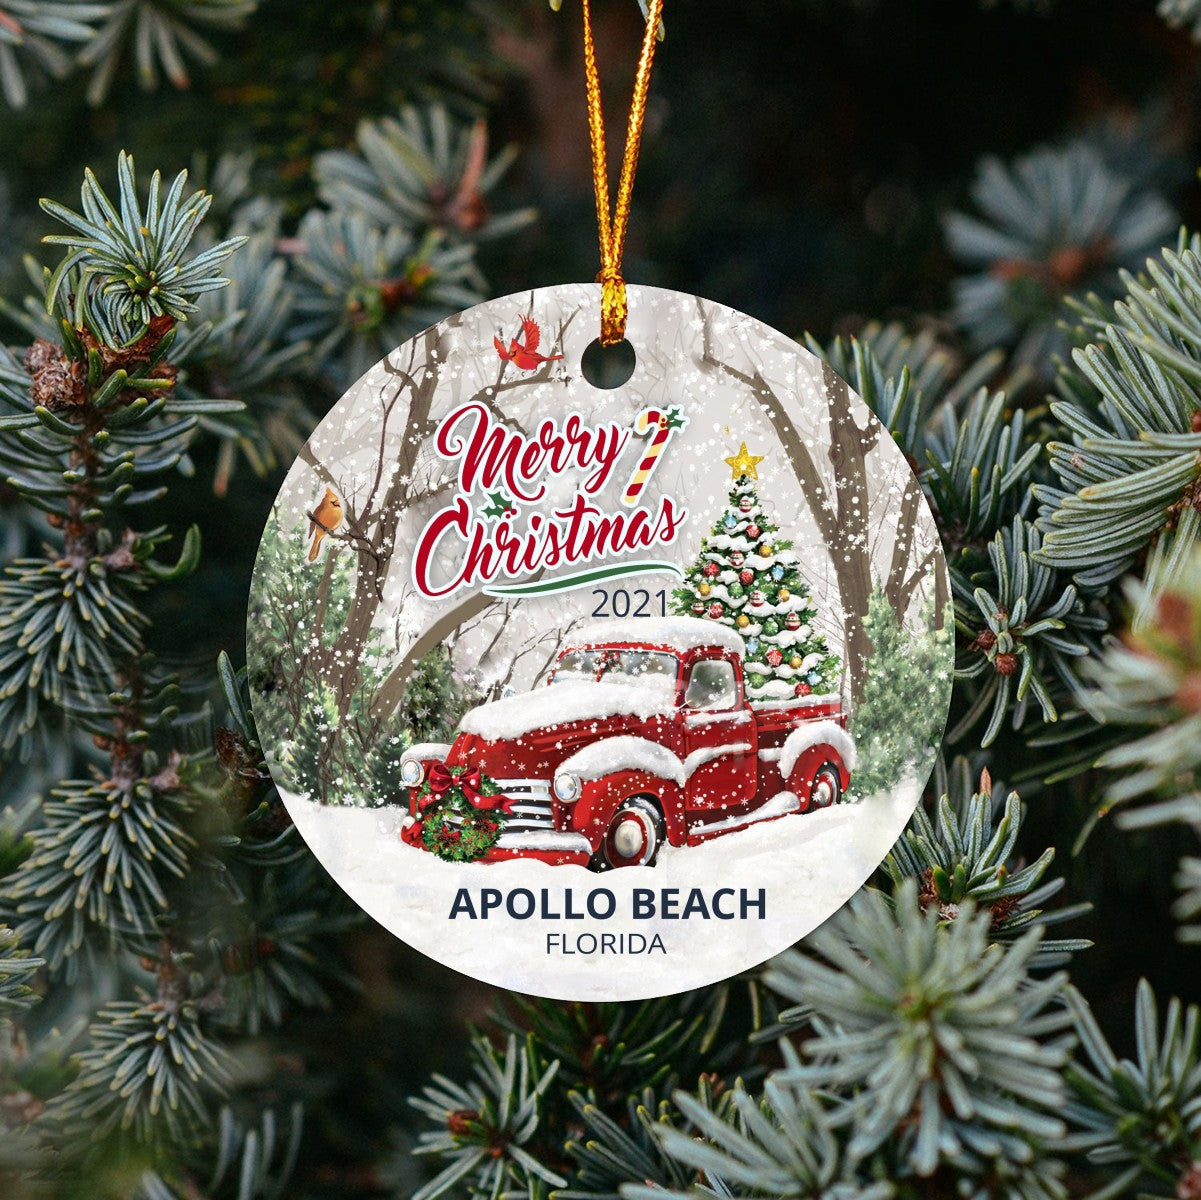 Christmas Tree Ornaments Apollo Beach - Ornament With Name City, State Apollo Beach Florida FL Ornament - Red Truck Xmas Ornaments 3'' Plastic Gift For Family, Friend And Housewarming